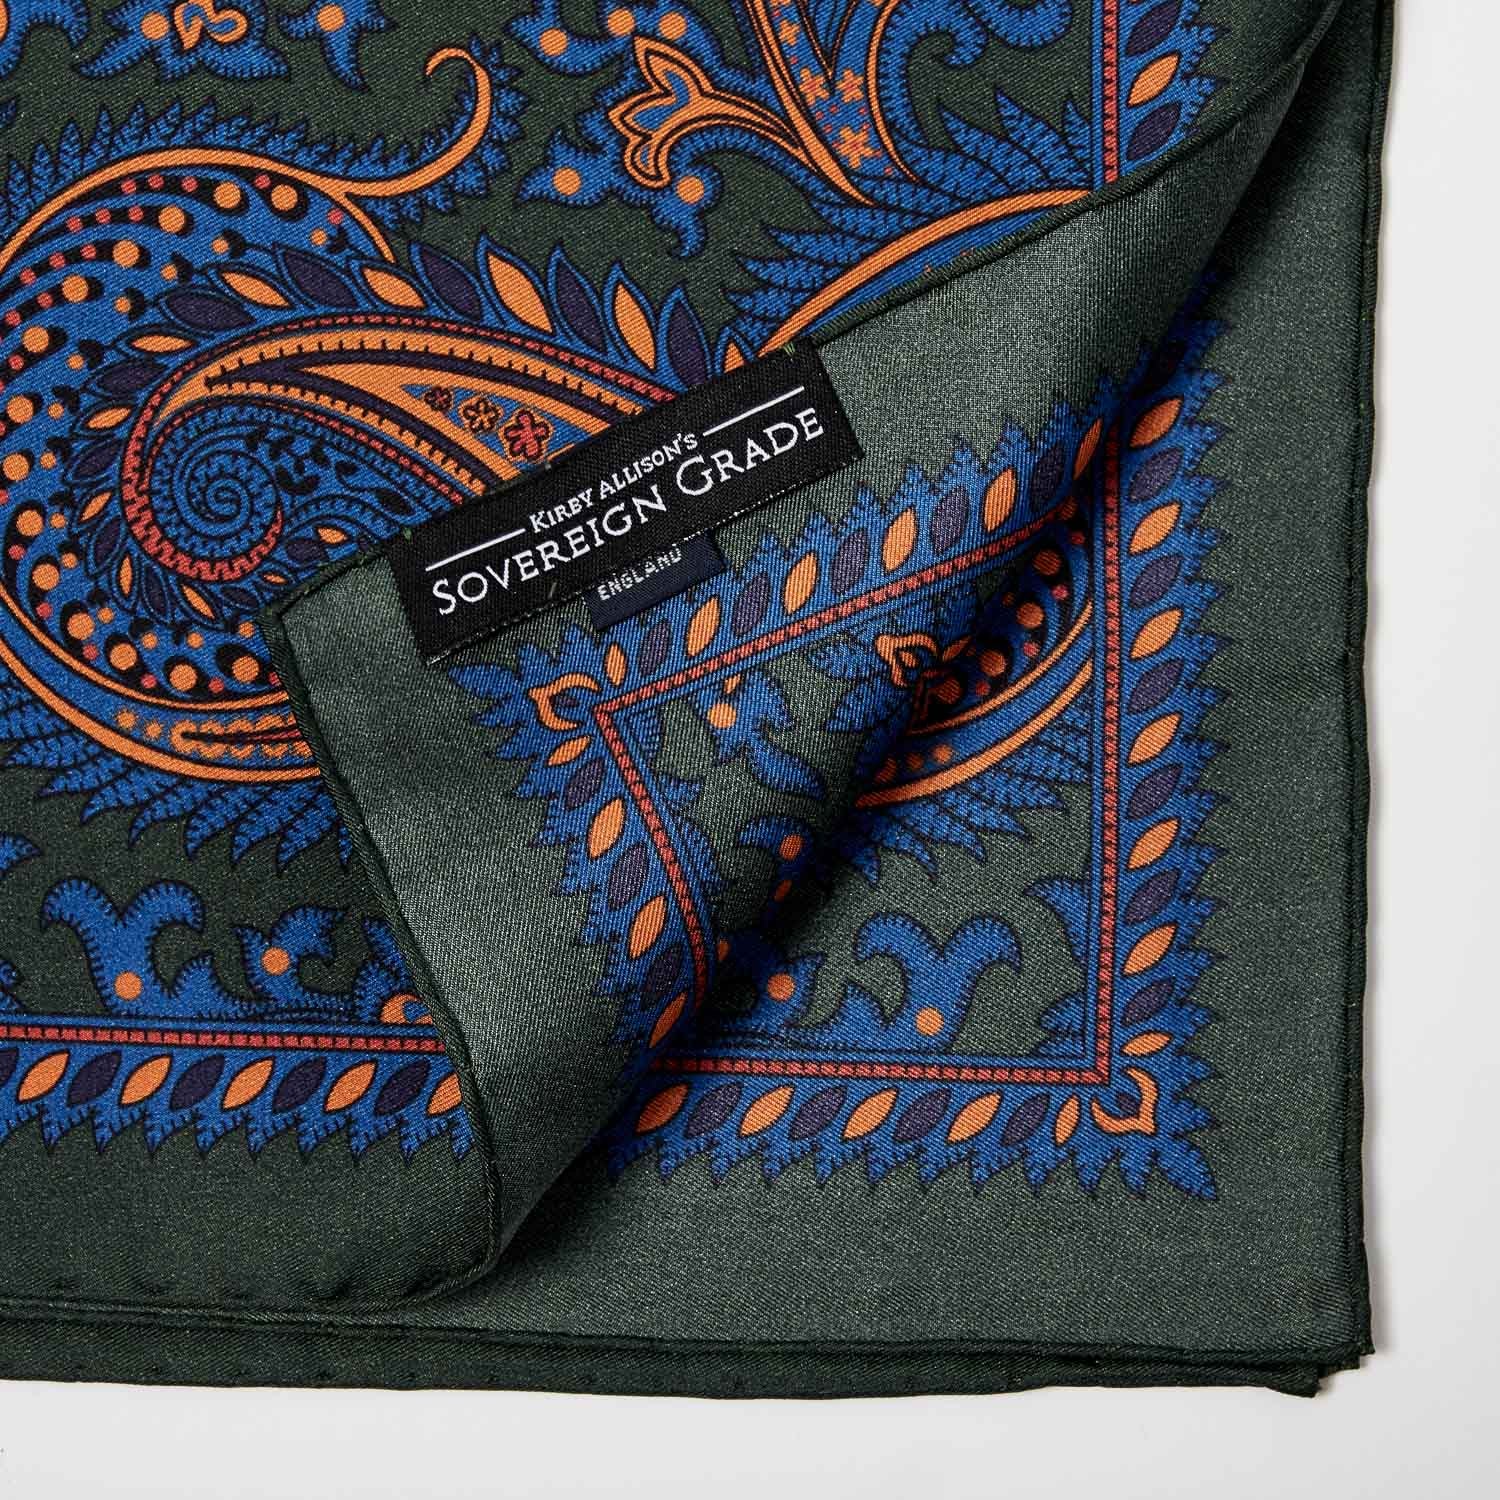 A formal Sovereign Grade 100% Silk Forest Pocket Square by KirbyAllison.com in orange and green.